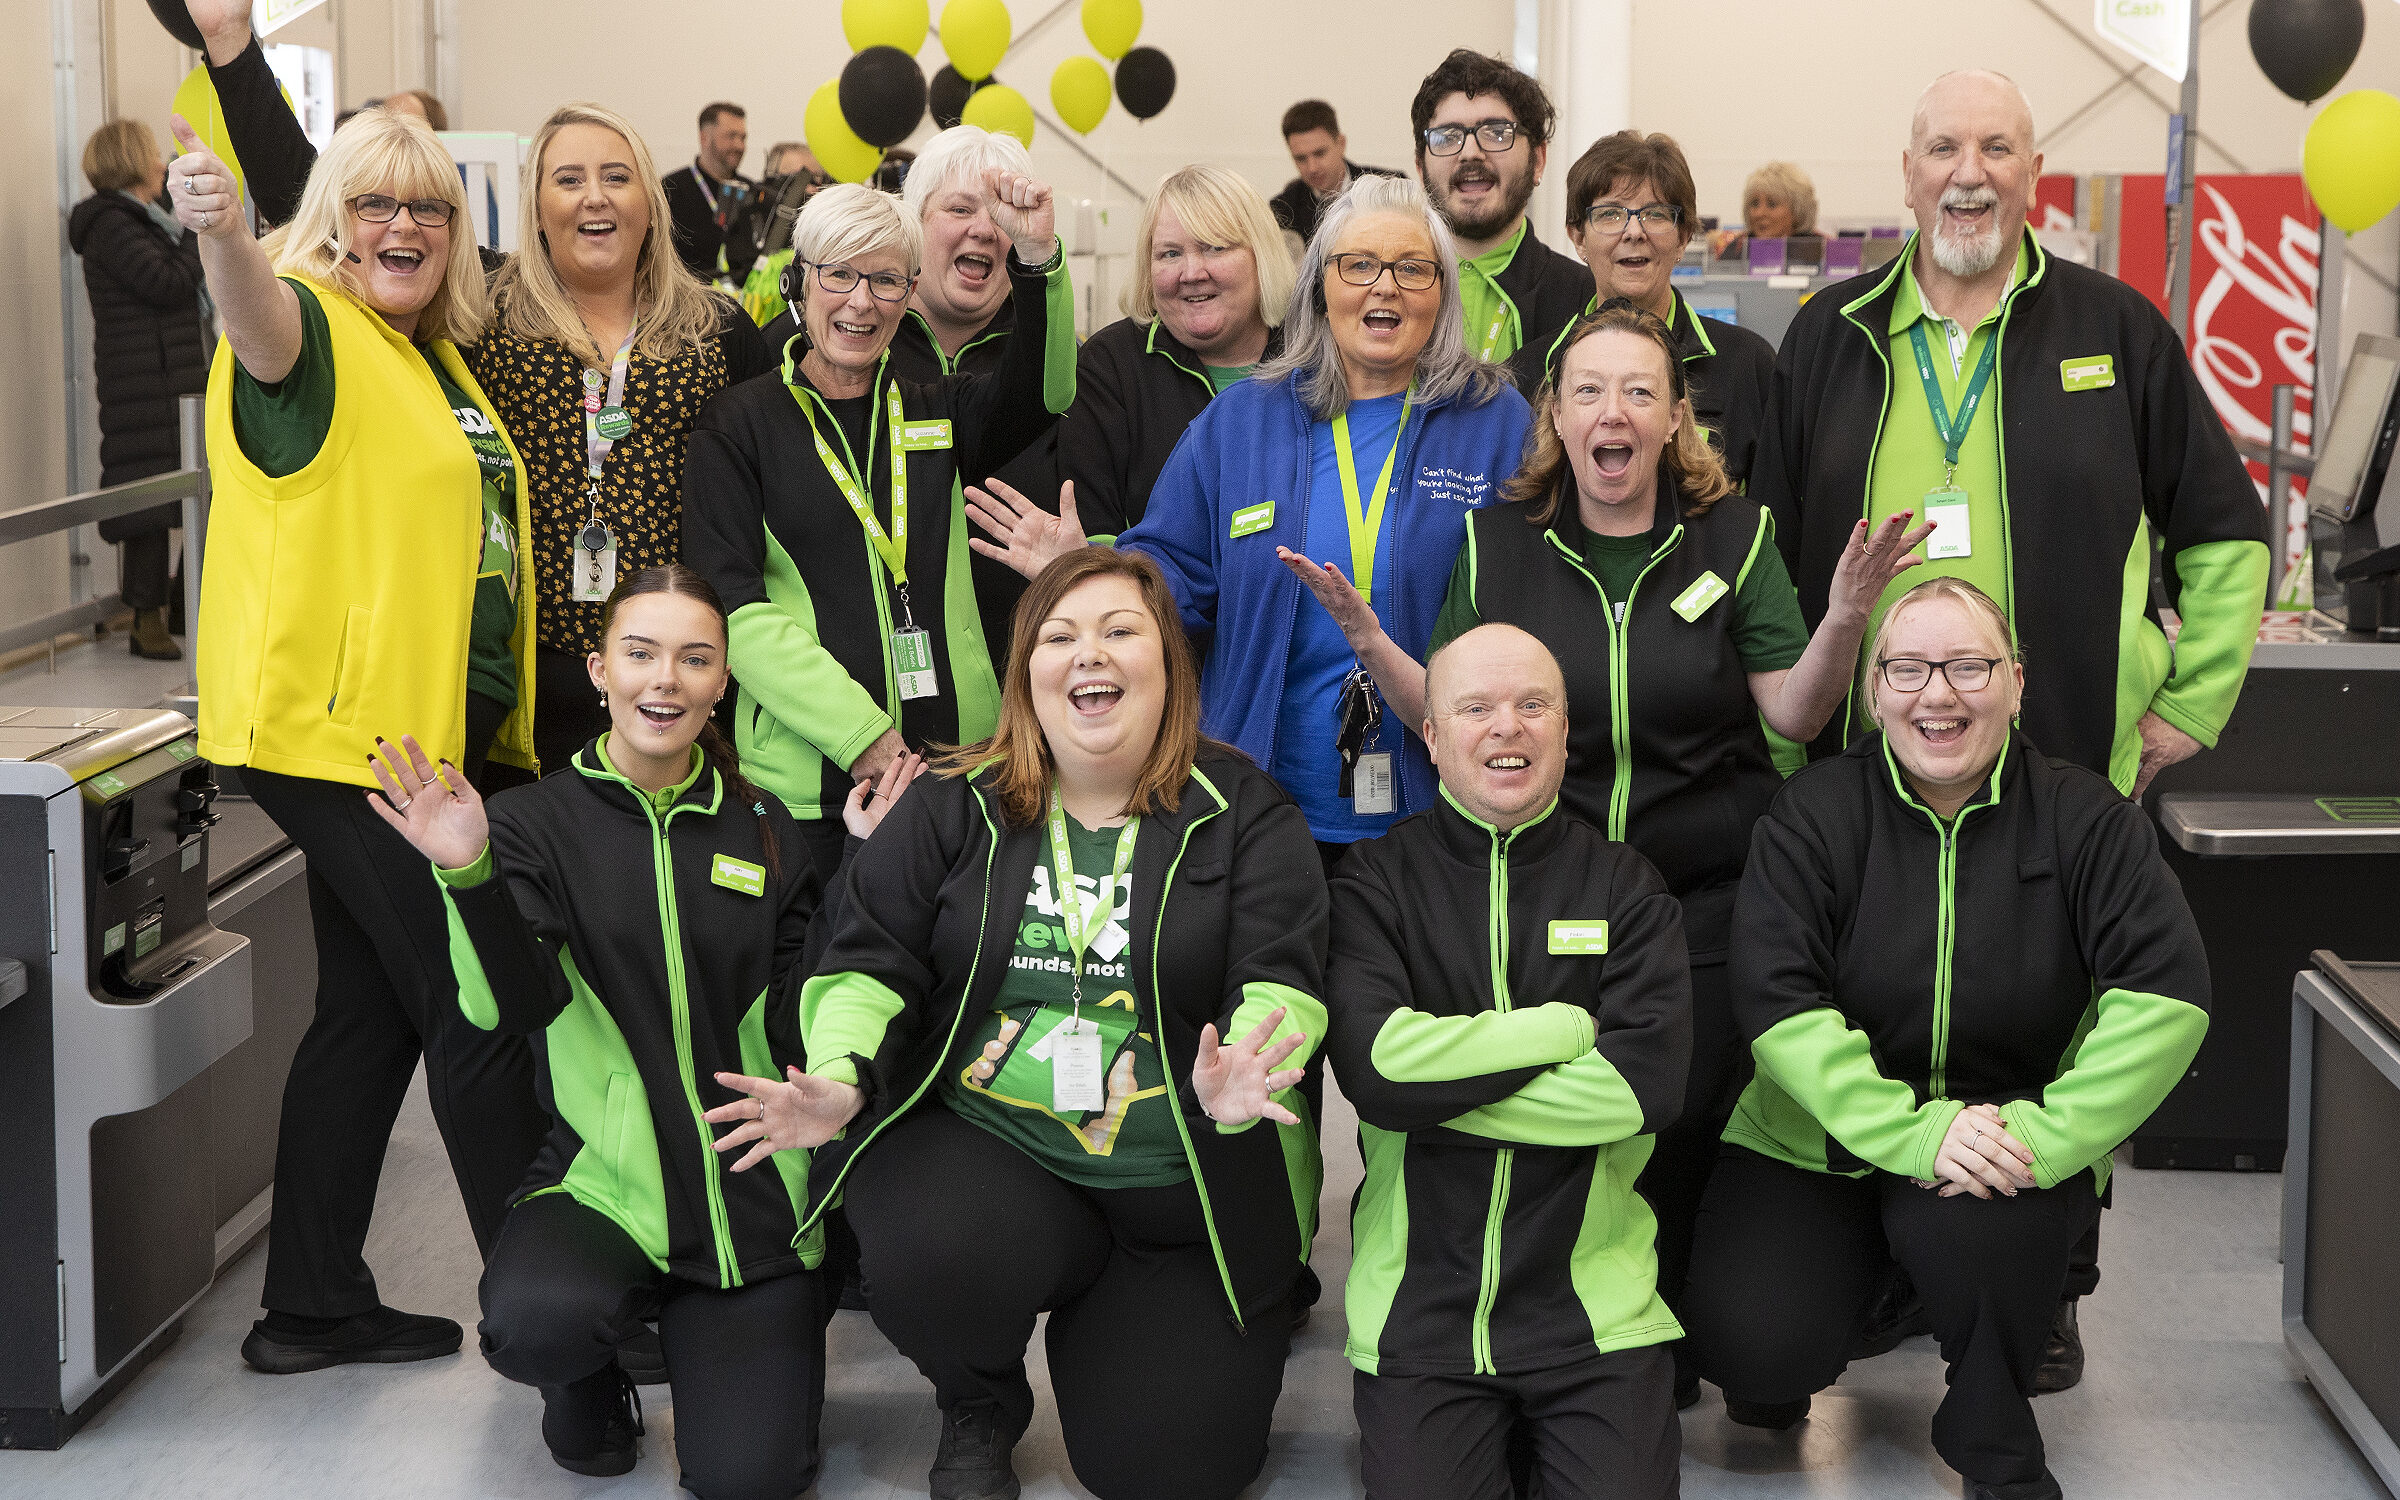 Staff at the launch of new ASDA store in Downpatrick